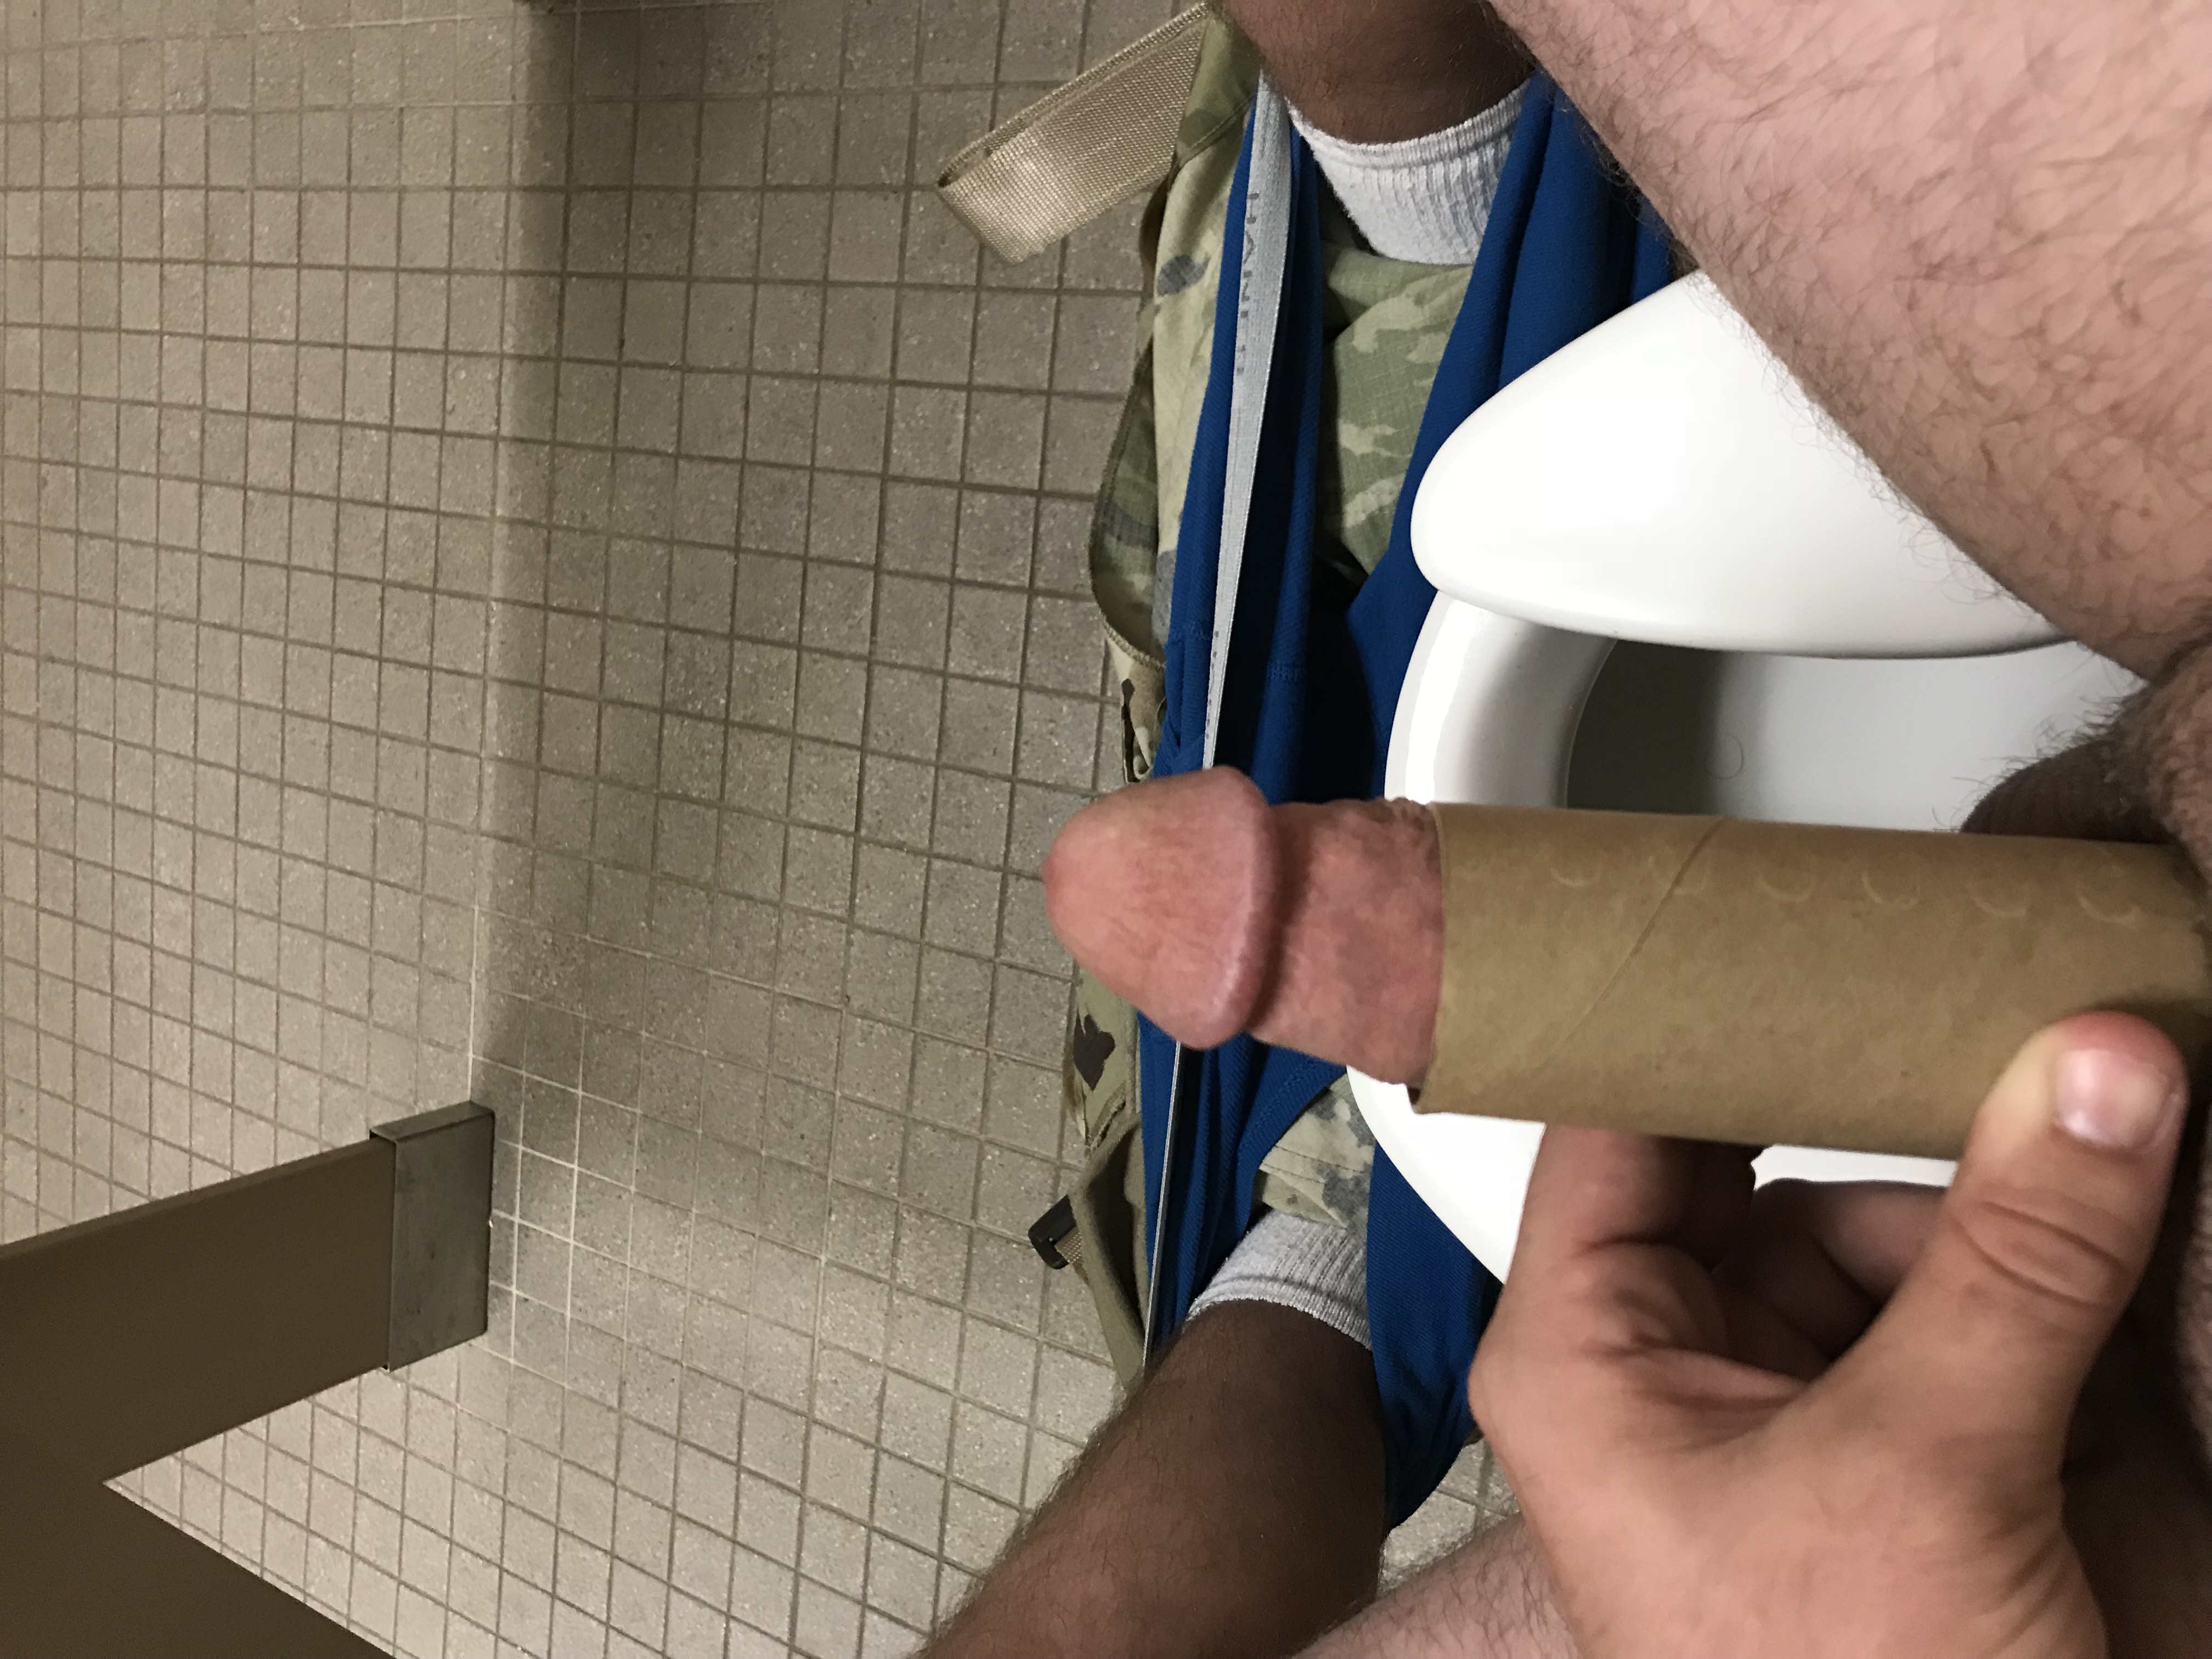 Toilet paper roll dick size test